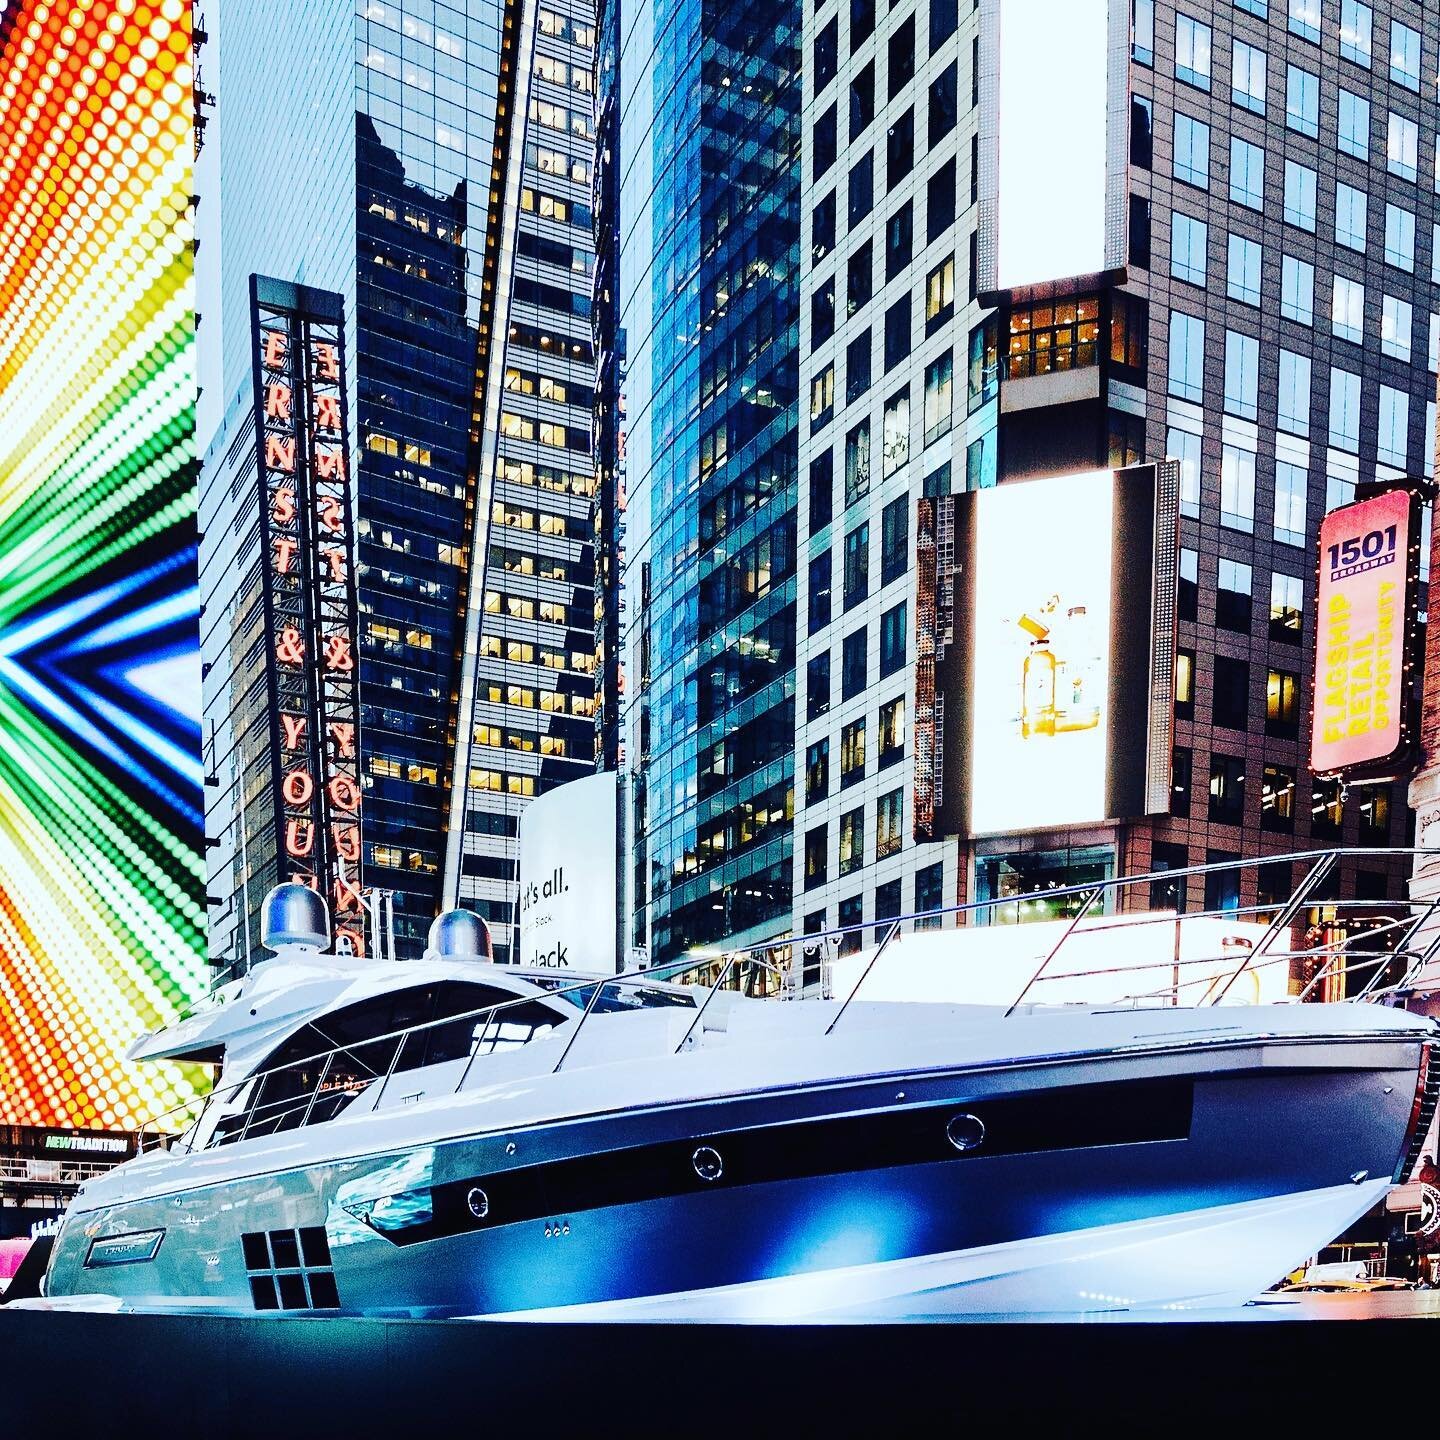 FOR THE FIRST TIME EVER, A YACHT ON SHOW IN THE WORLD&rsquo;S MOST FAMOUS CITY
.
She played hard to get, like most beautiful women, but in the end love won and on June 6 Azimut S6 finally arrived in Times Square
.
.
🖥📱Read on http://bit.ly/Skipper2